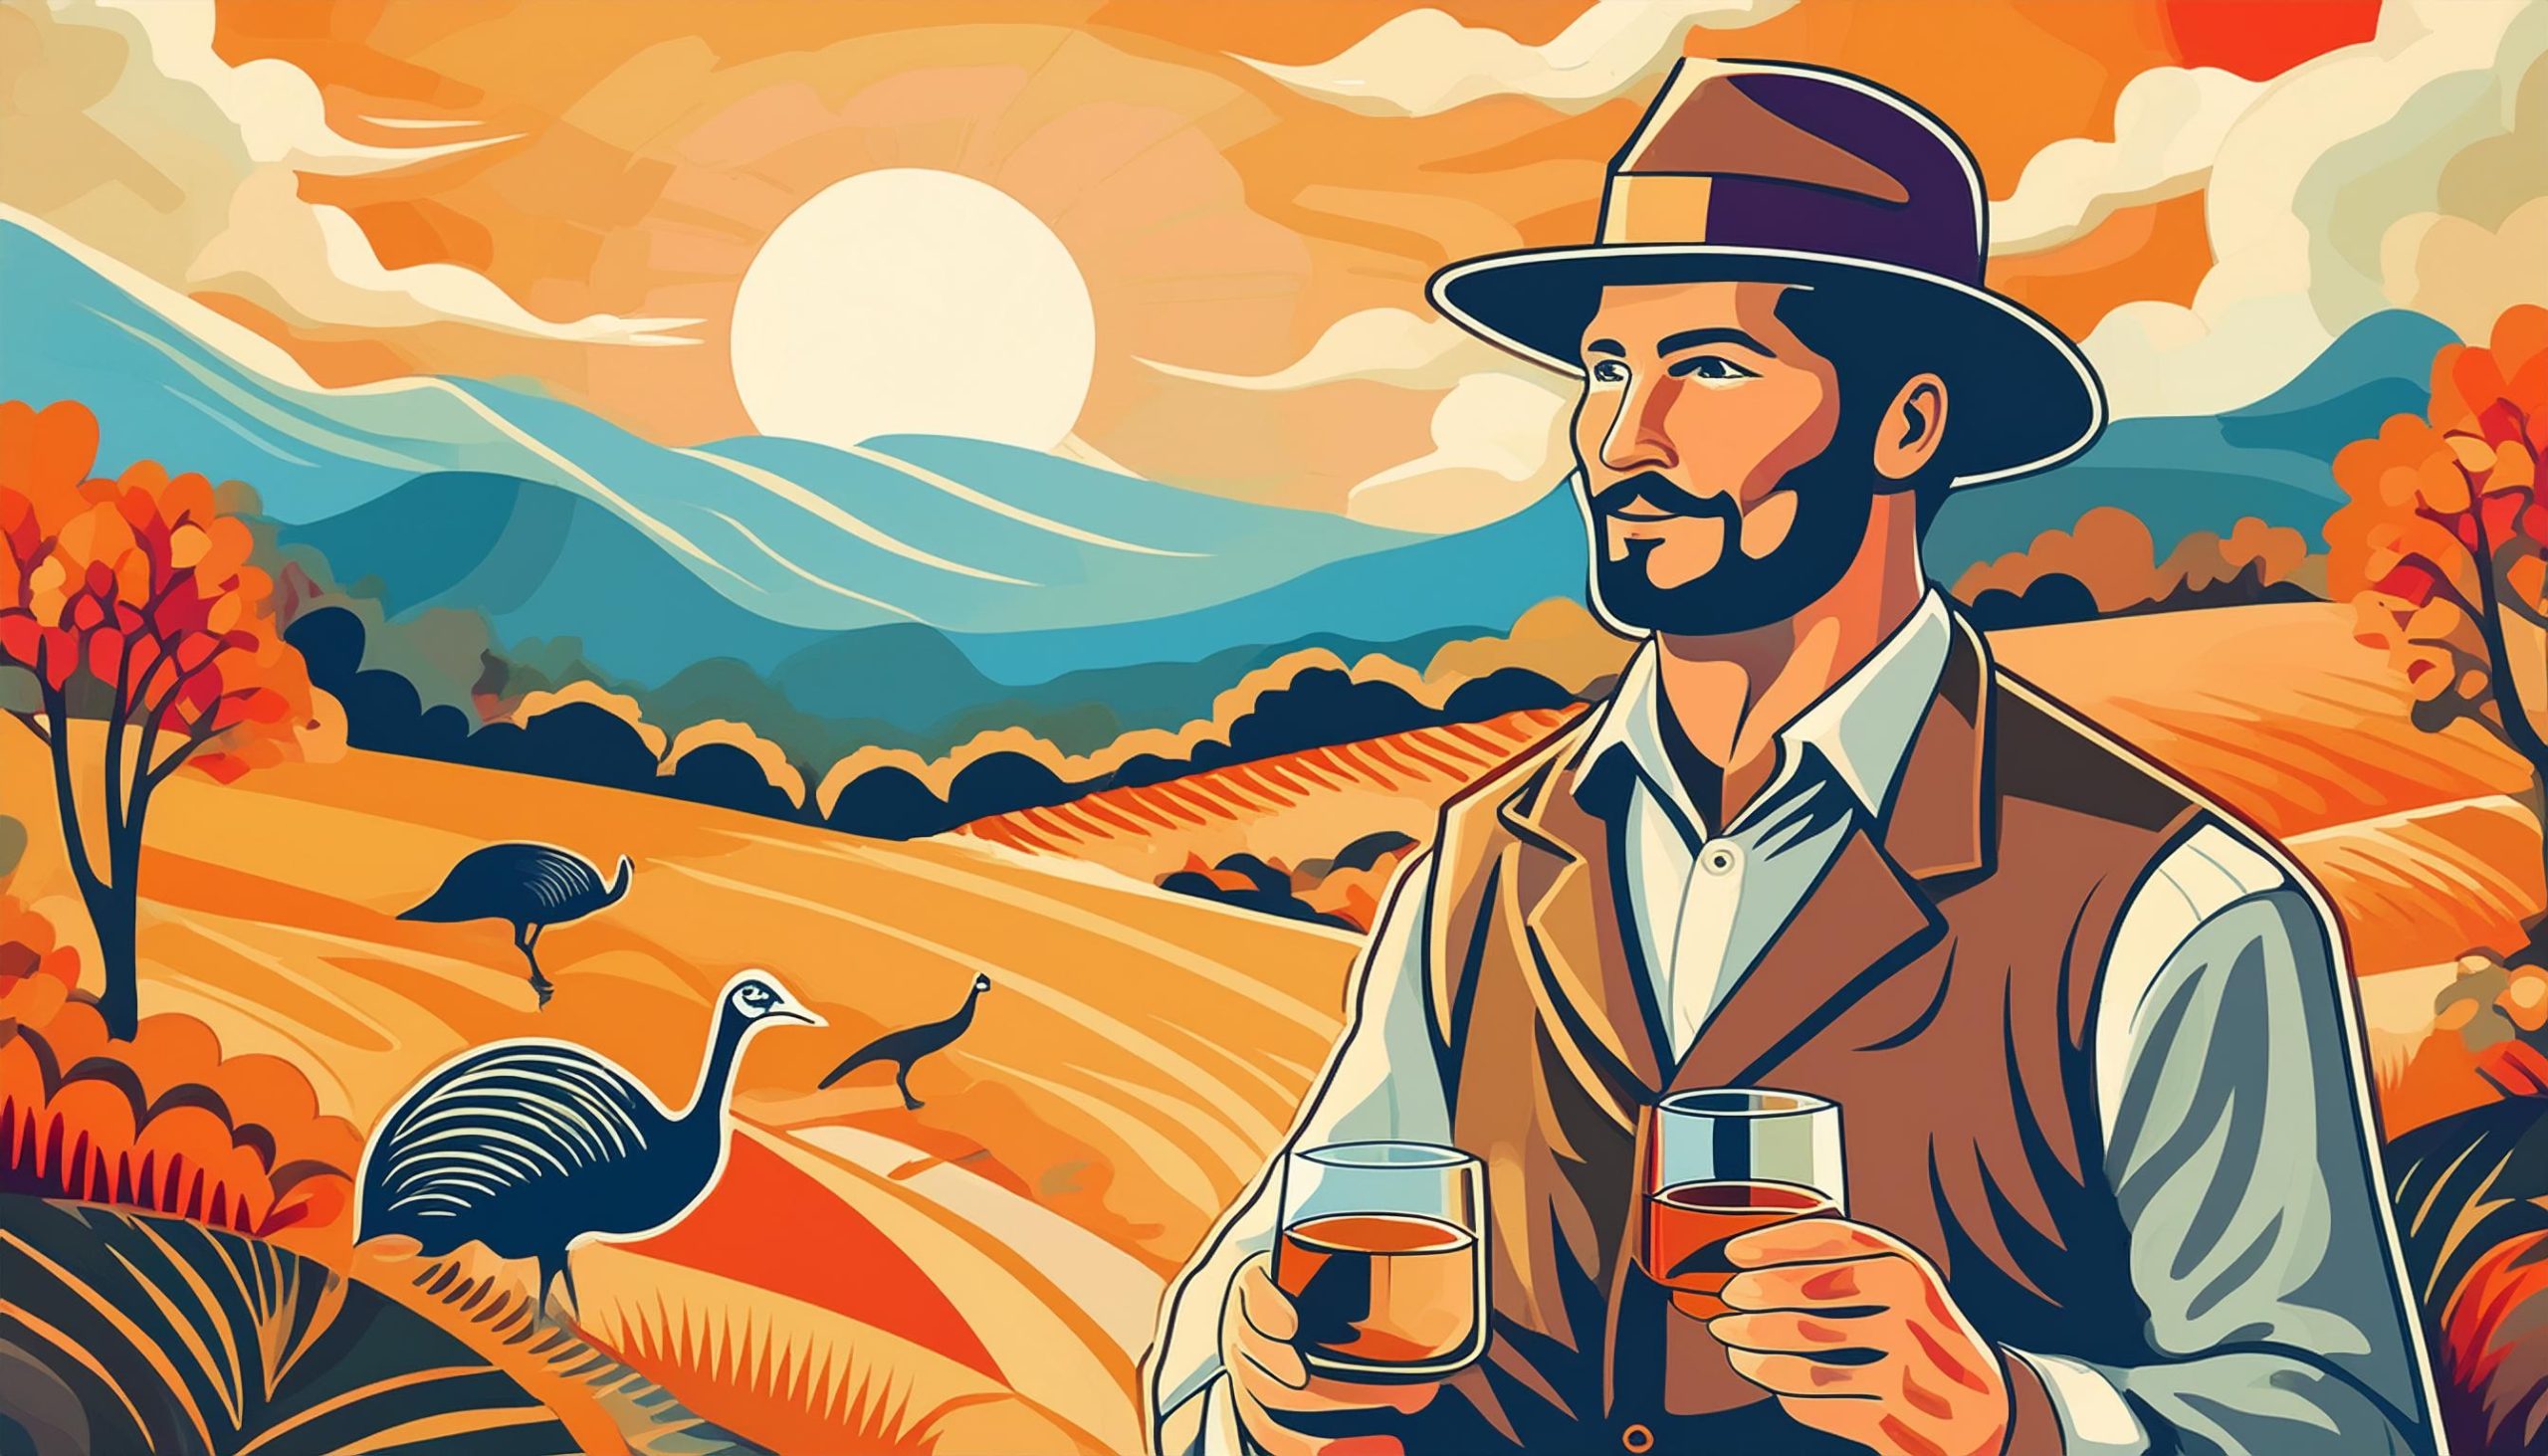 An art deco style illustration of a man in the late 18th century, holding two glasses of bourbon, turkeys in the landscapes behind him 